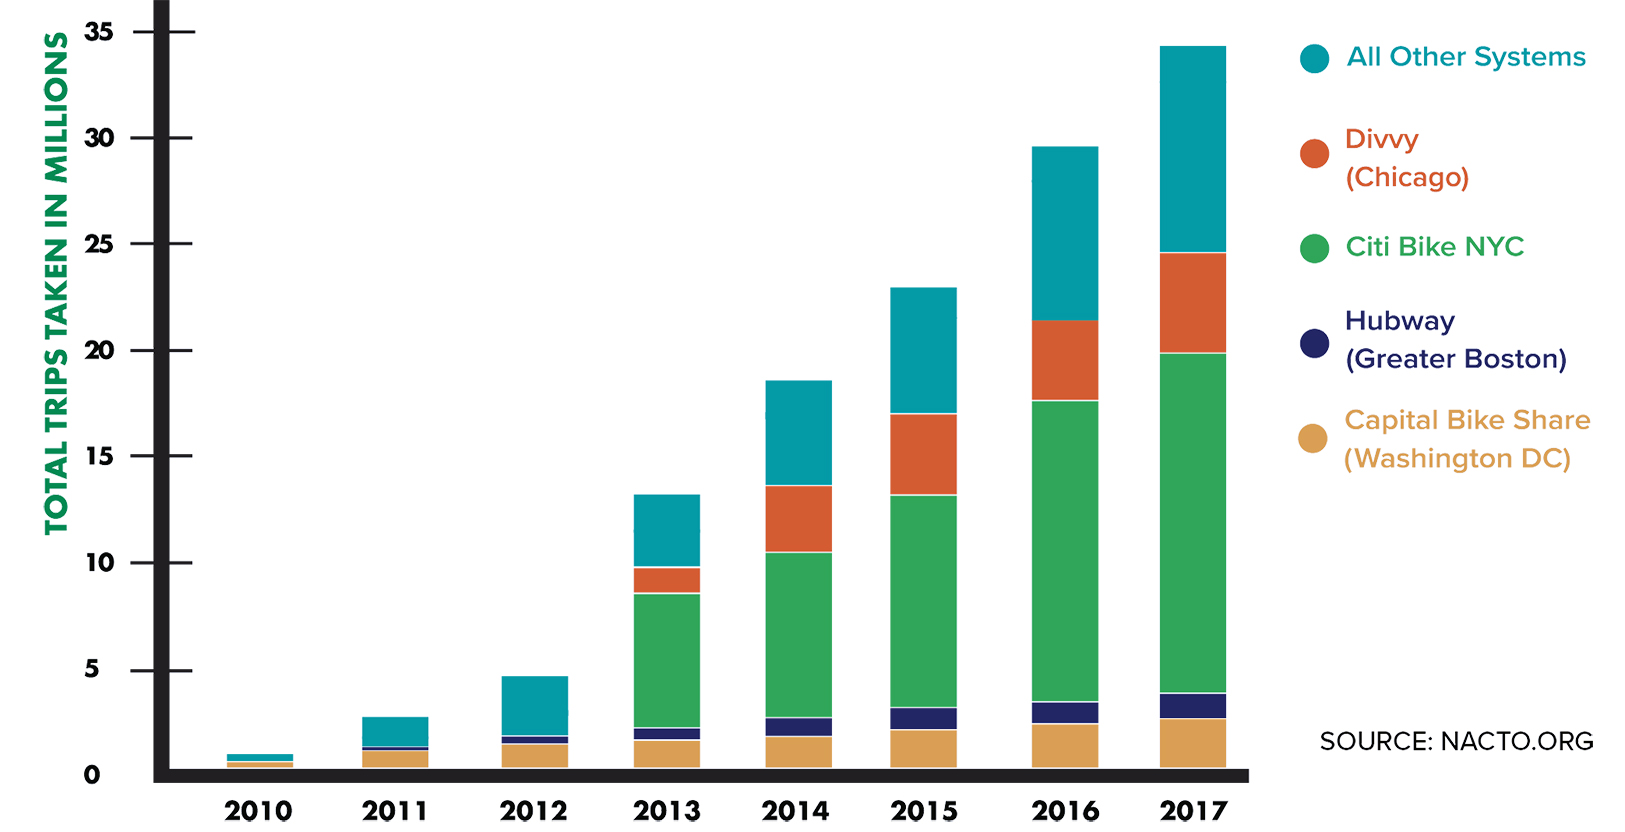 Figure 6-27 is a bar chart that displays the total trips taken in millions from 2010 to 2017 for Divvy (Chicago), Citi Bike NYC, Hubway (Greater Boston), Capital Bike Share (Washington, DC) and the Total of All Other Systems.